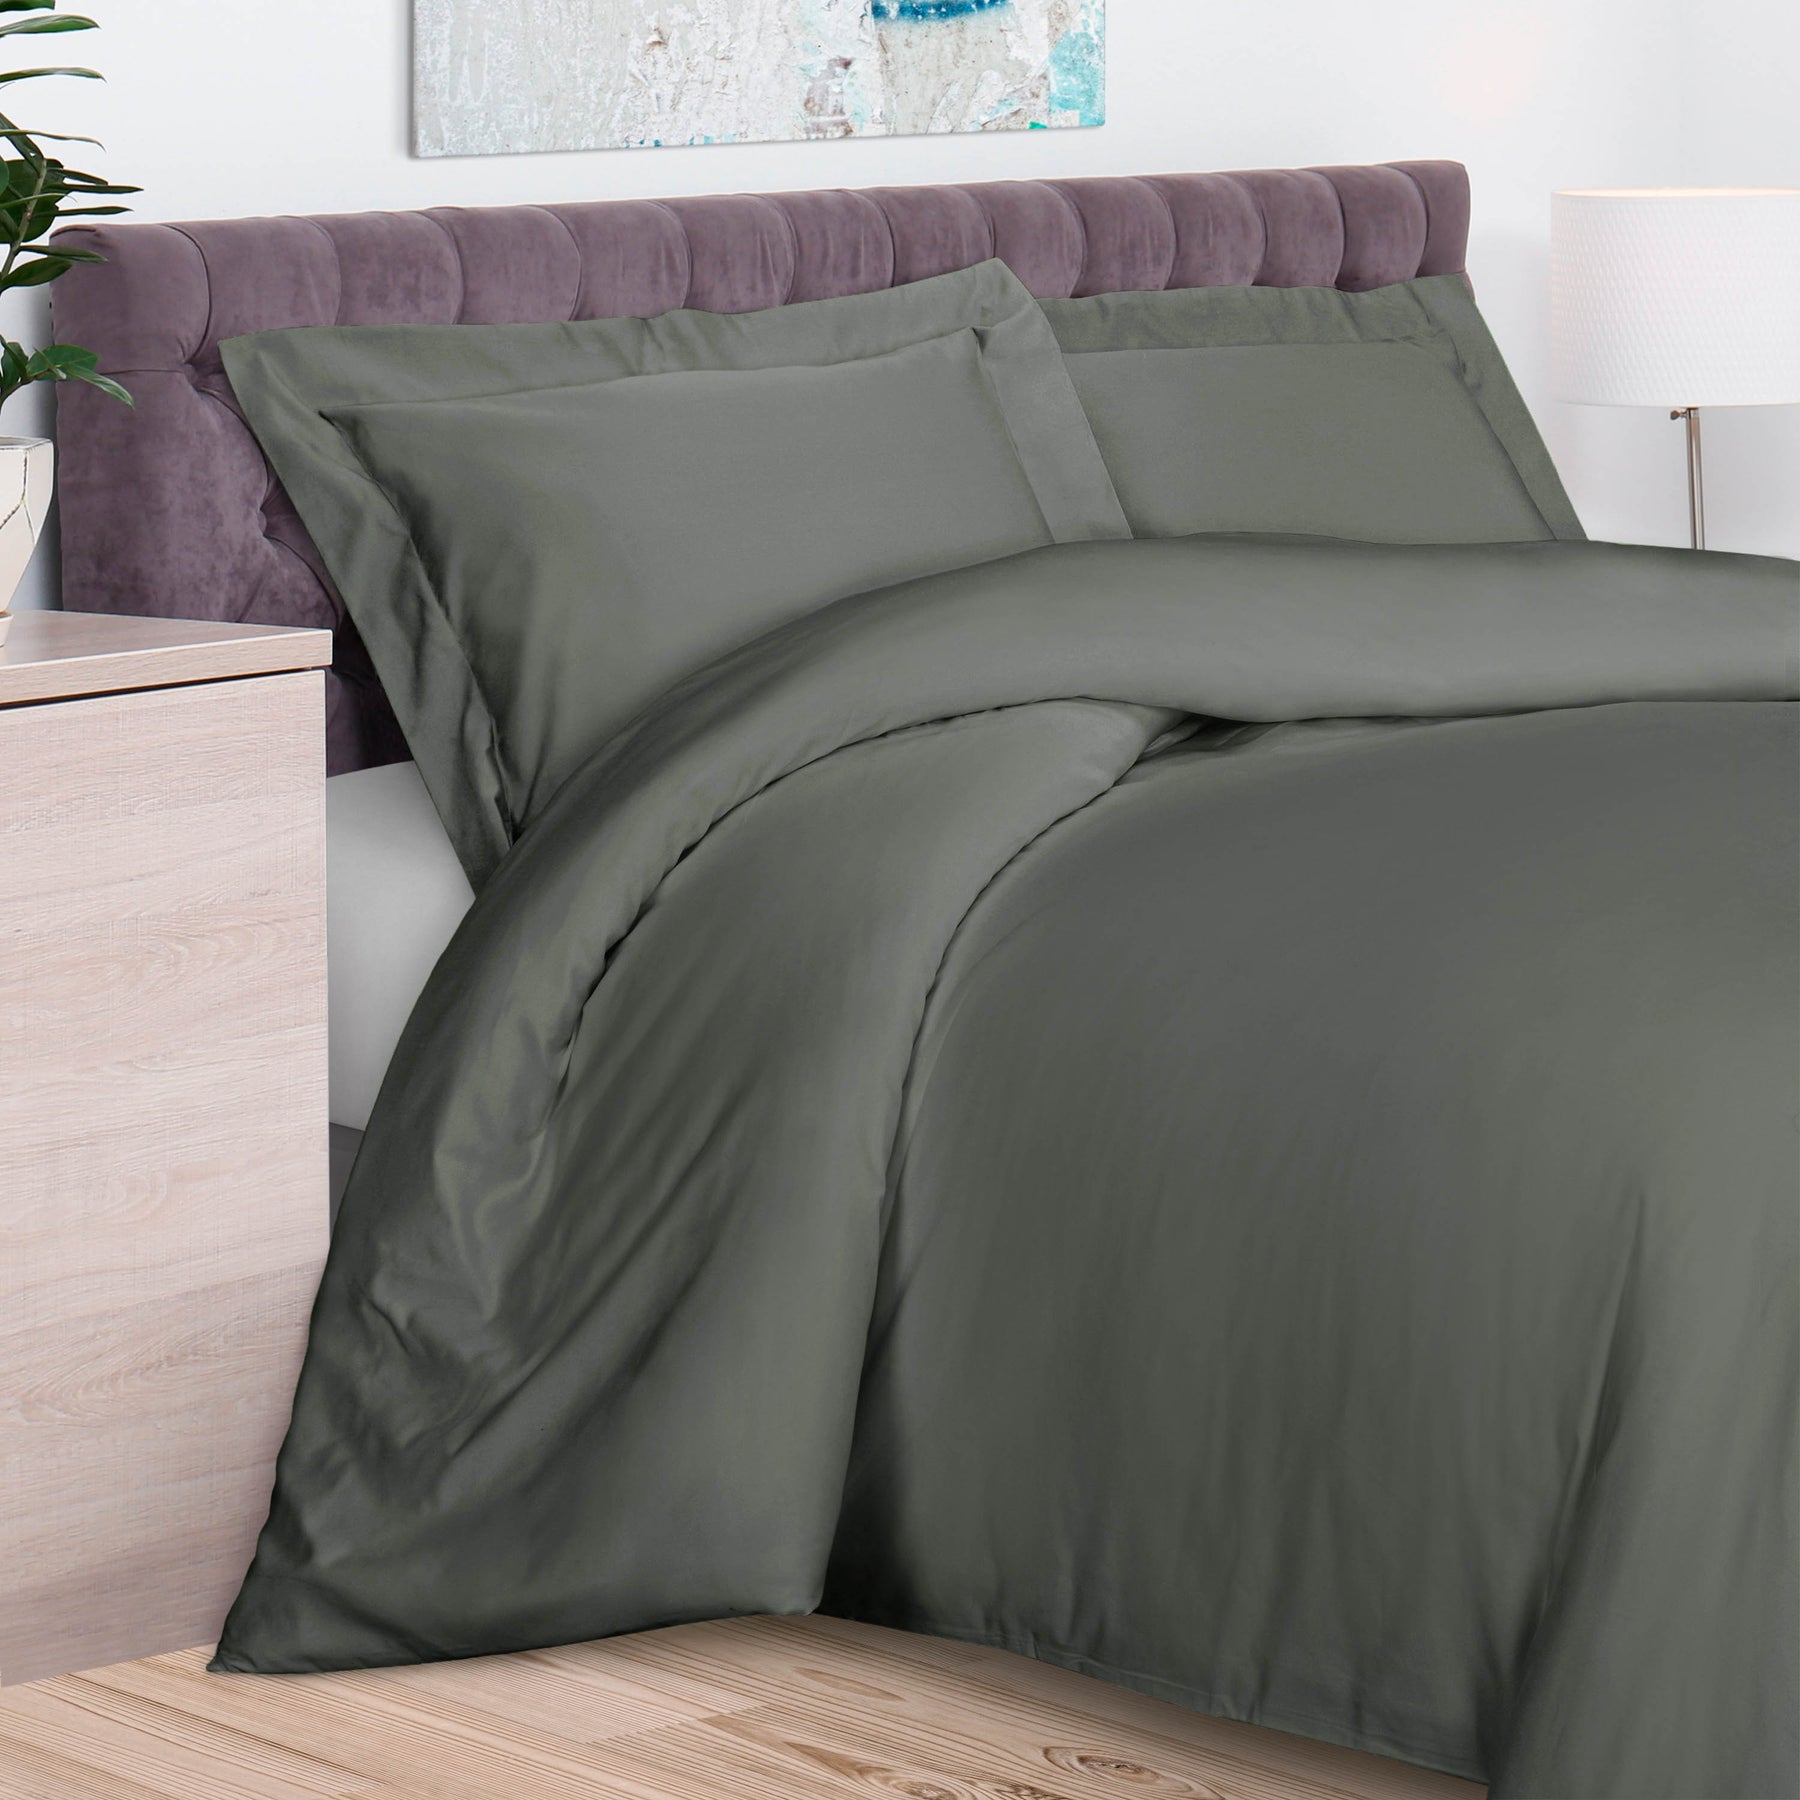 100% Rayon From Bamboo 300 Thread Count Solid Duvet Cover Set - Gray